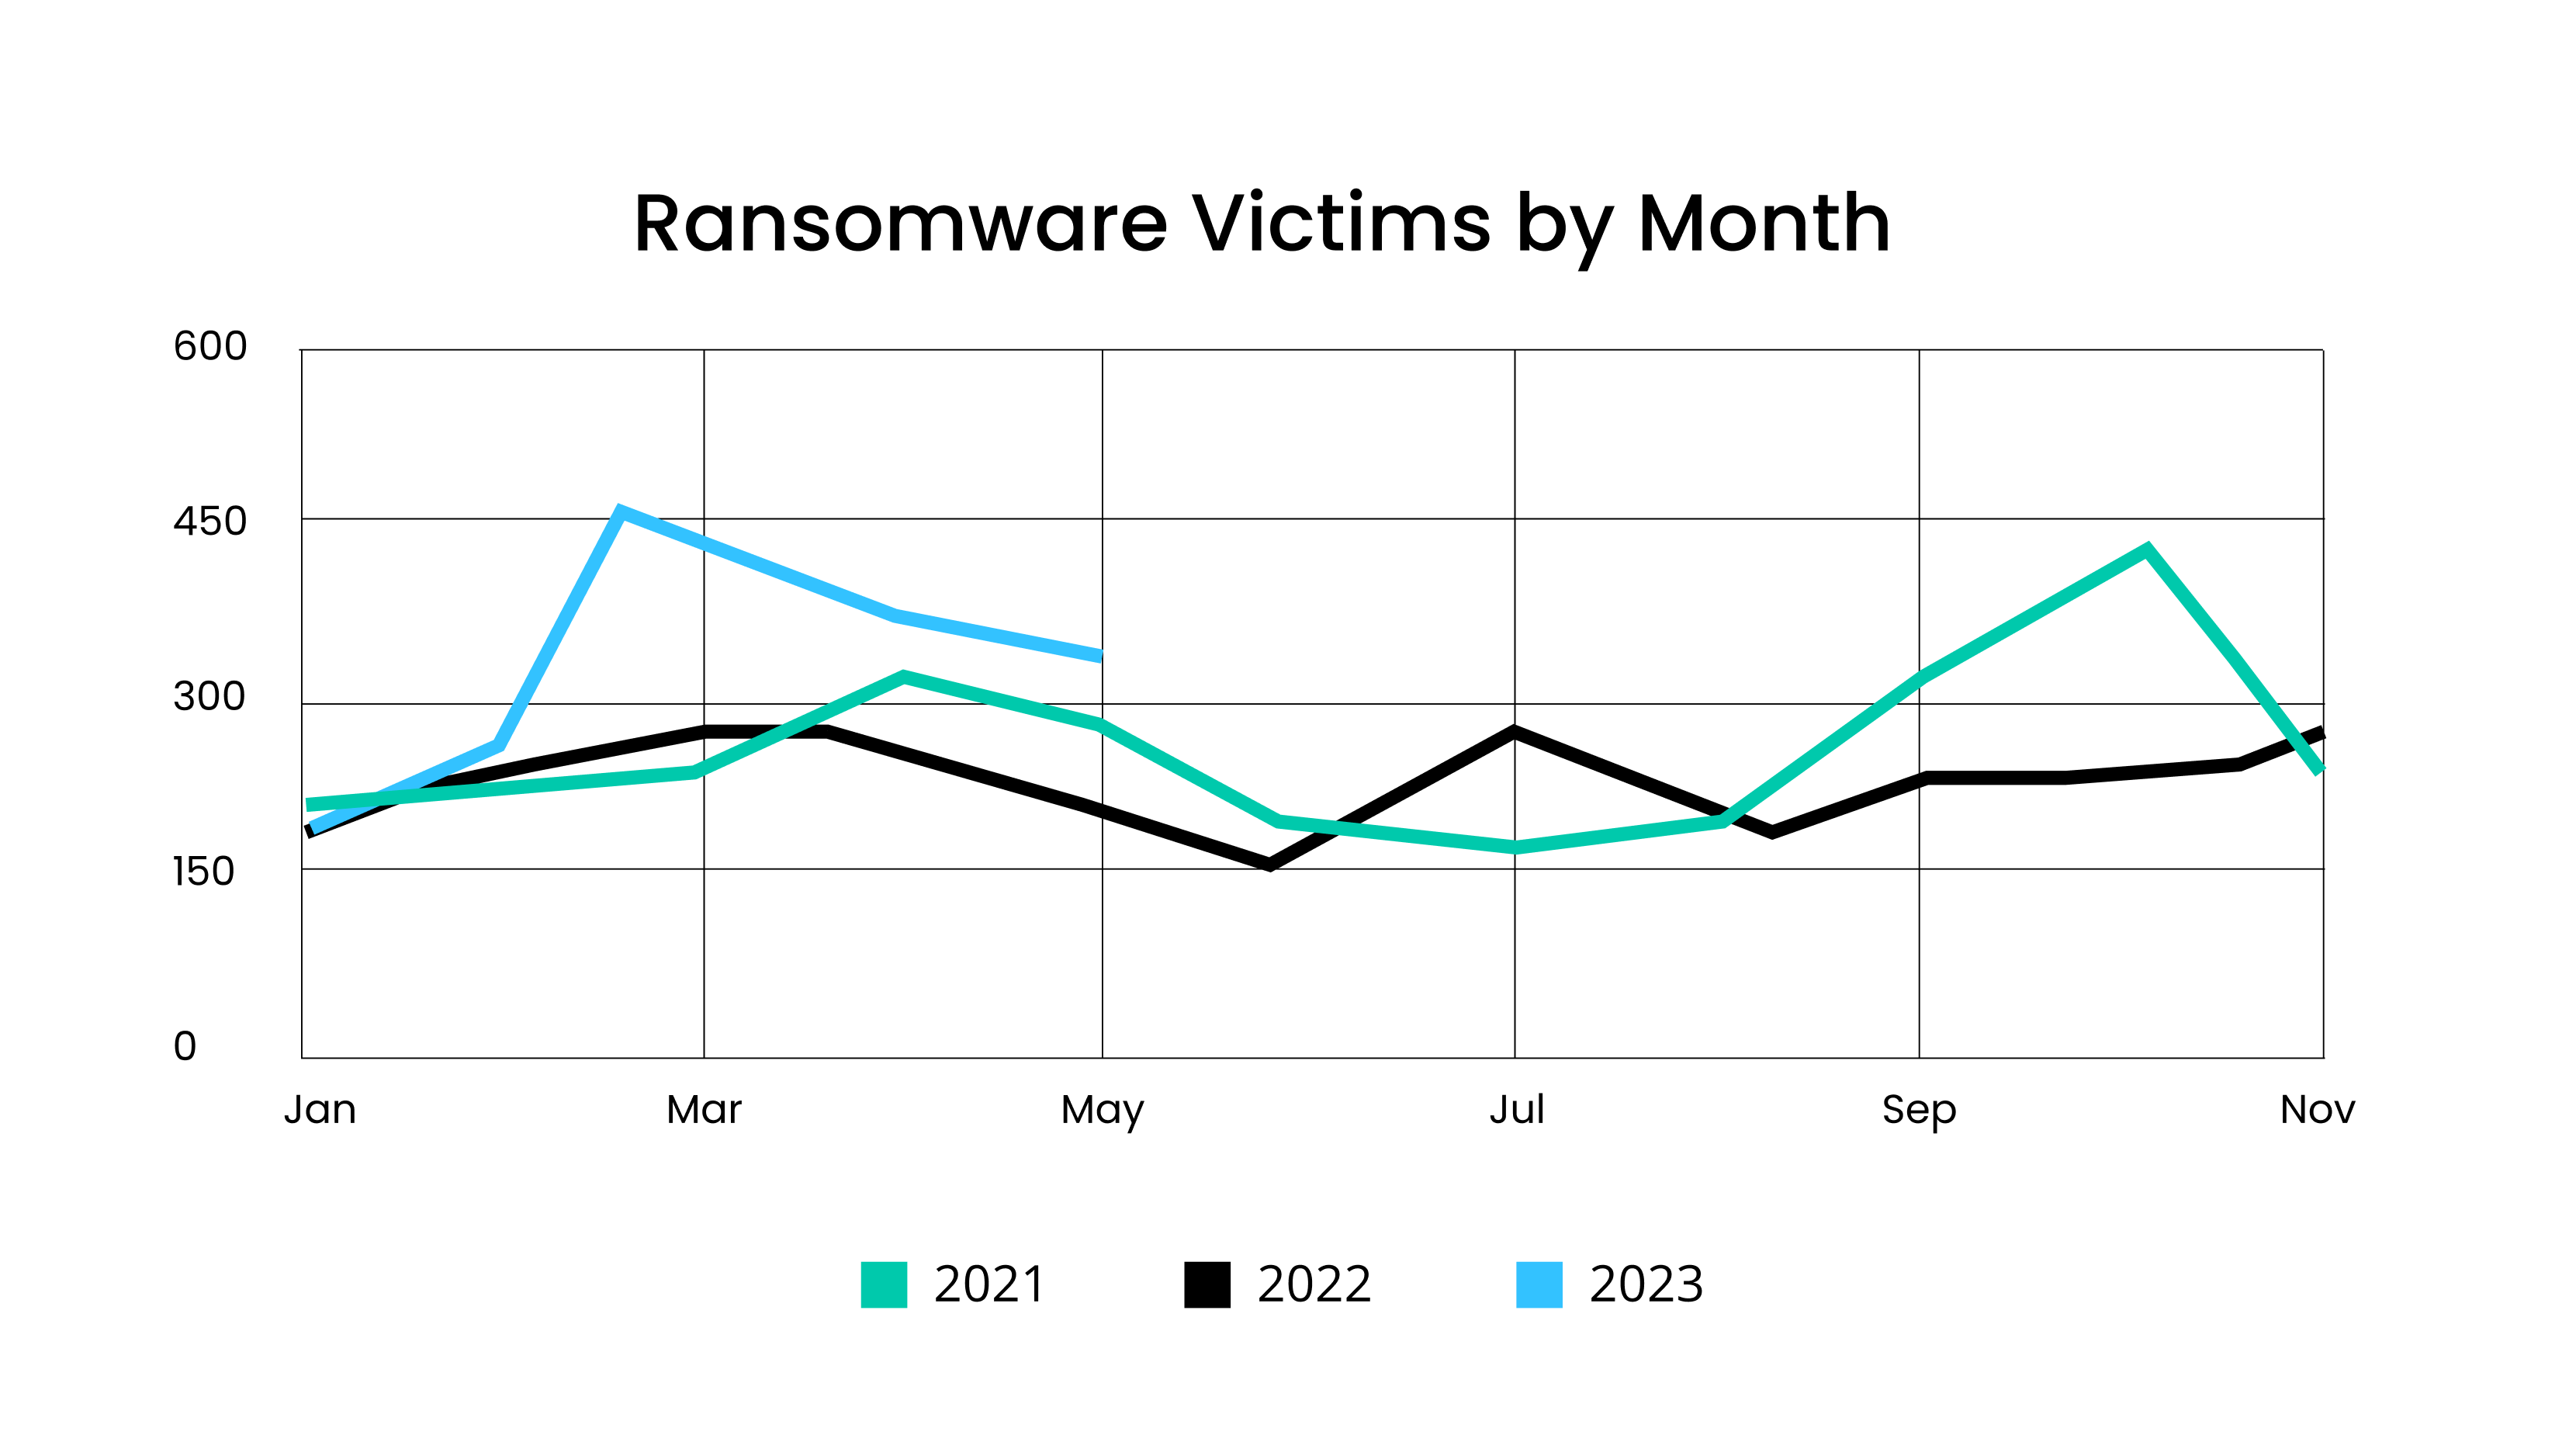 [LINE GRAPH] Ransomware Victims by Month (2021-2023)